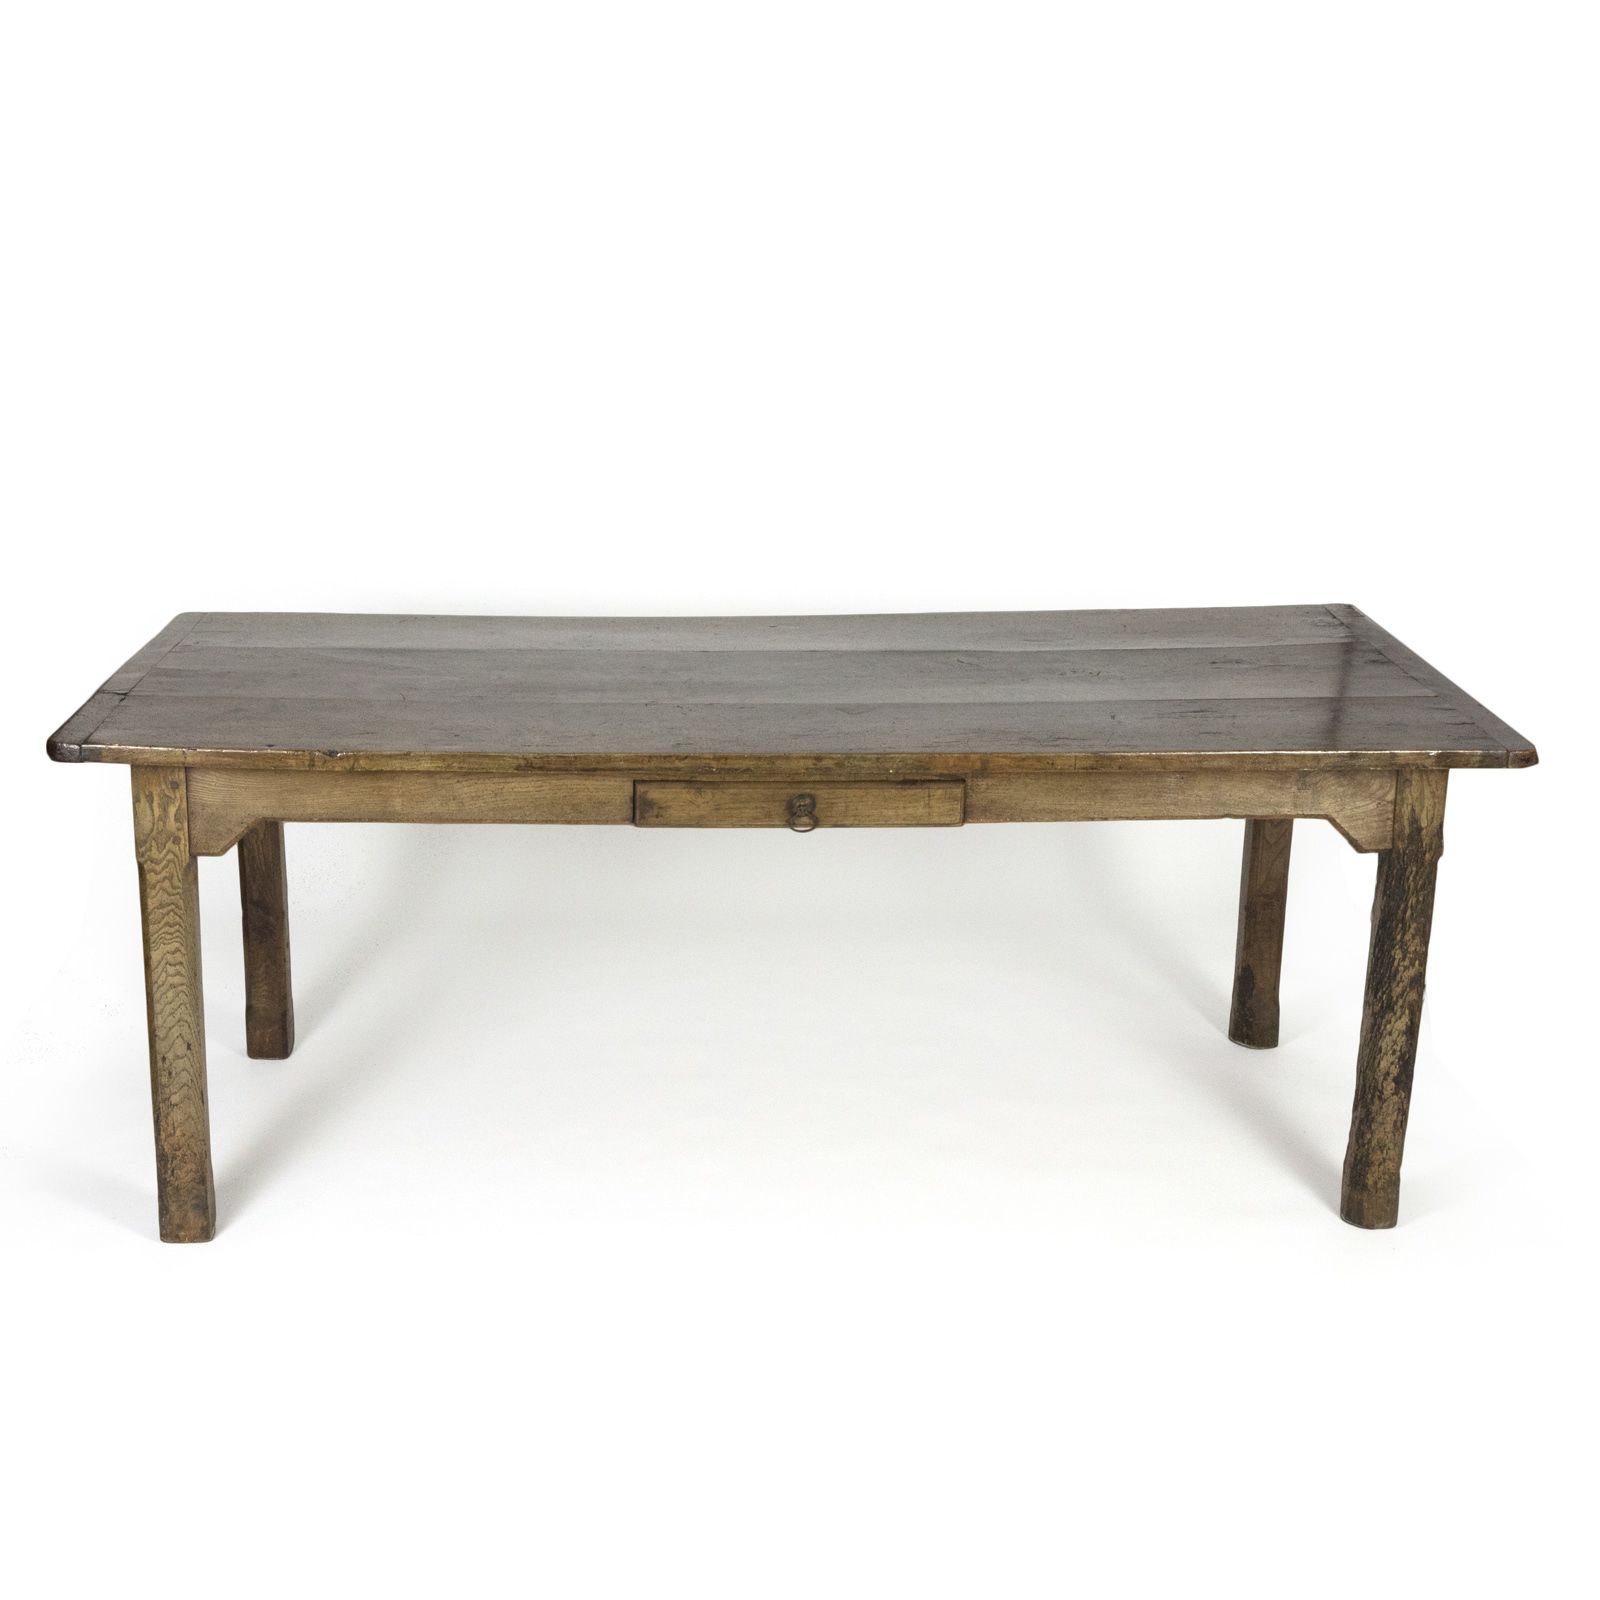 Authentic English Country Farm Table, 19th Century (415) 355 1690 Intended For Reclaimed Fruitwood Coffee Tables (View 20 of 20)